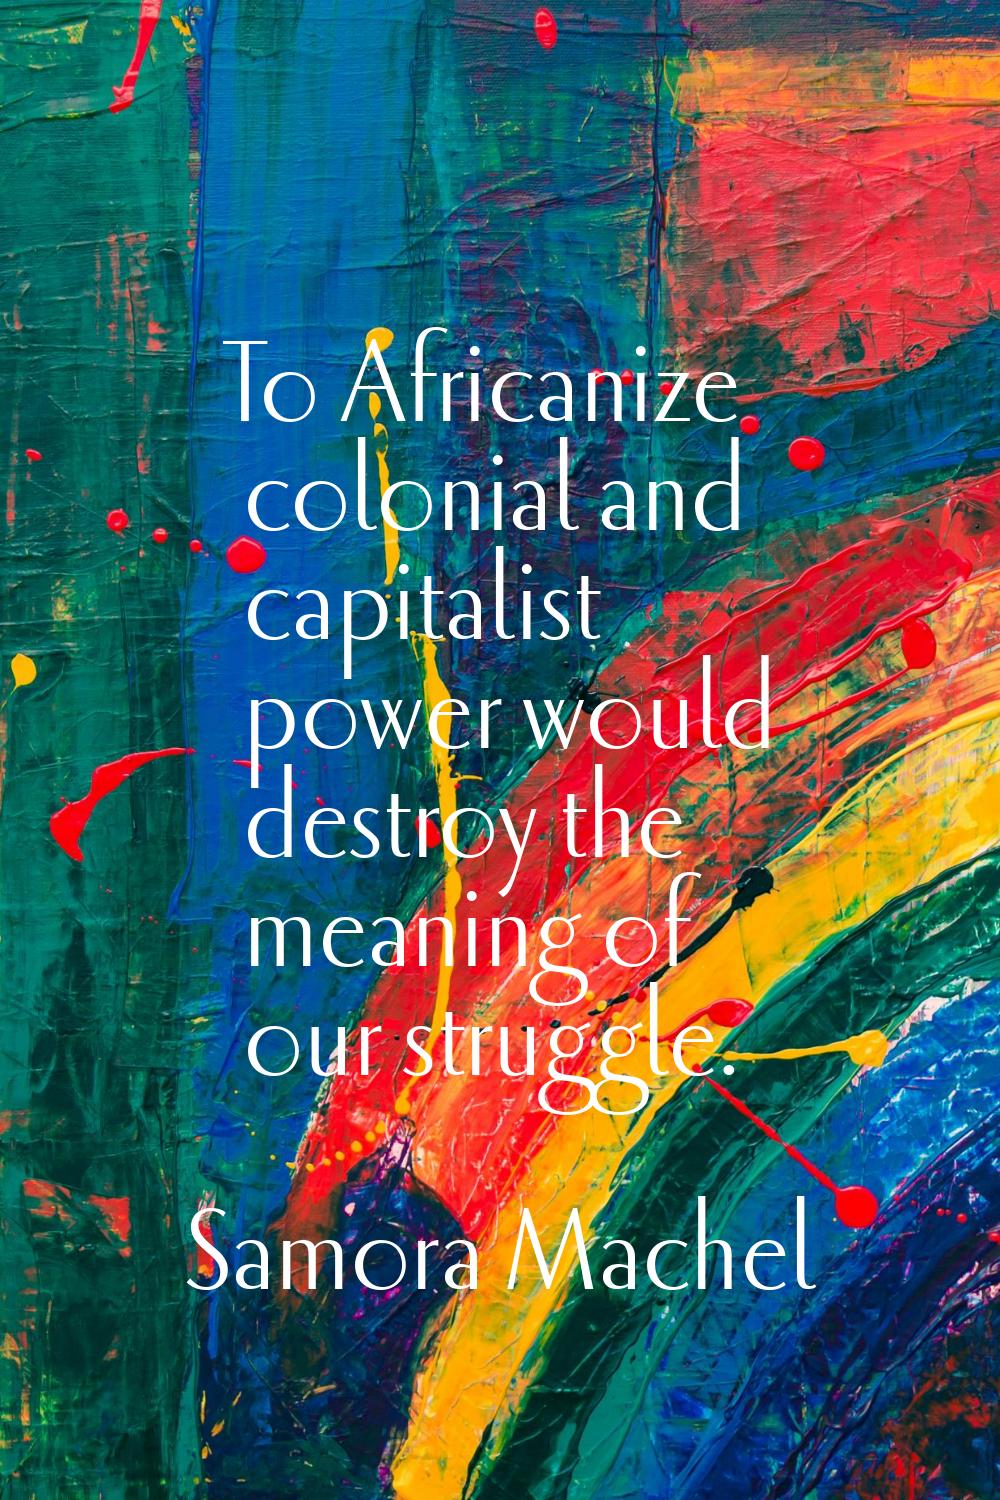 To Africanize colonial and capitalist power would destroy the meaning of our struggle.